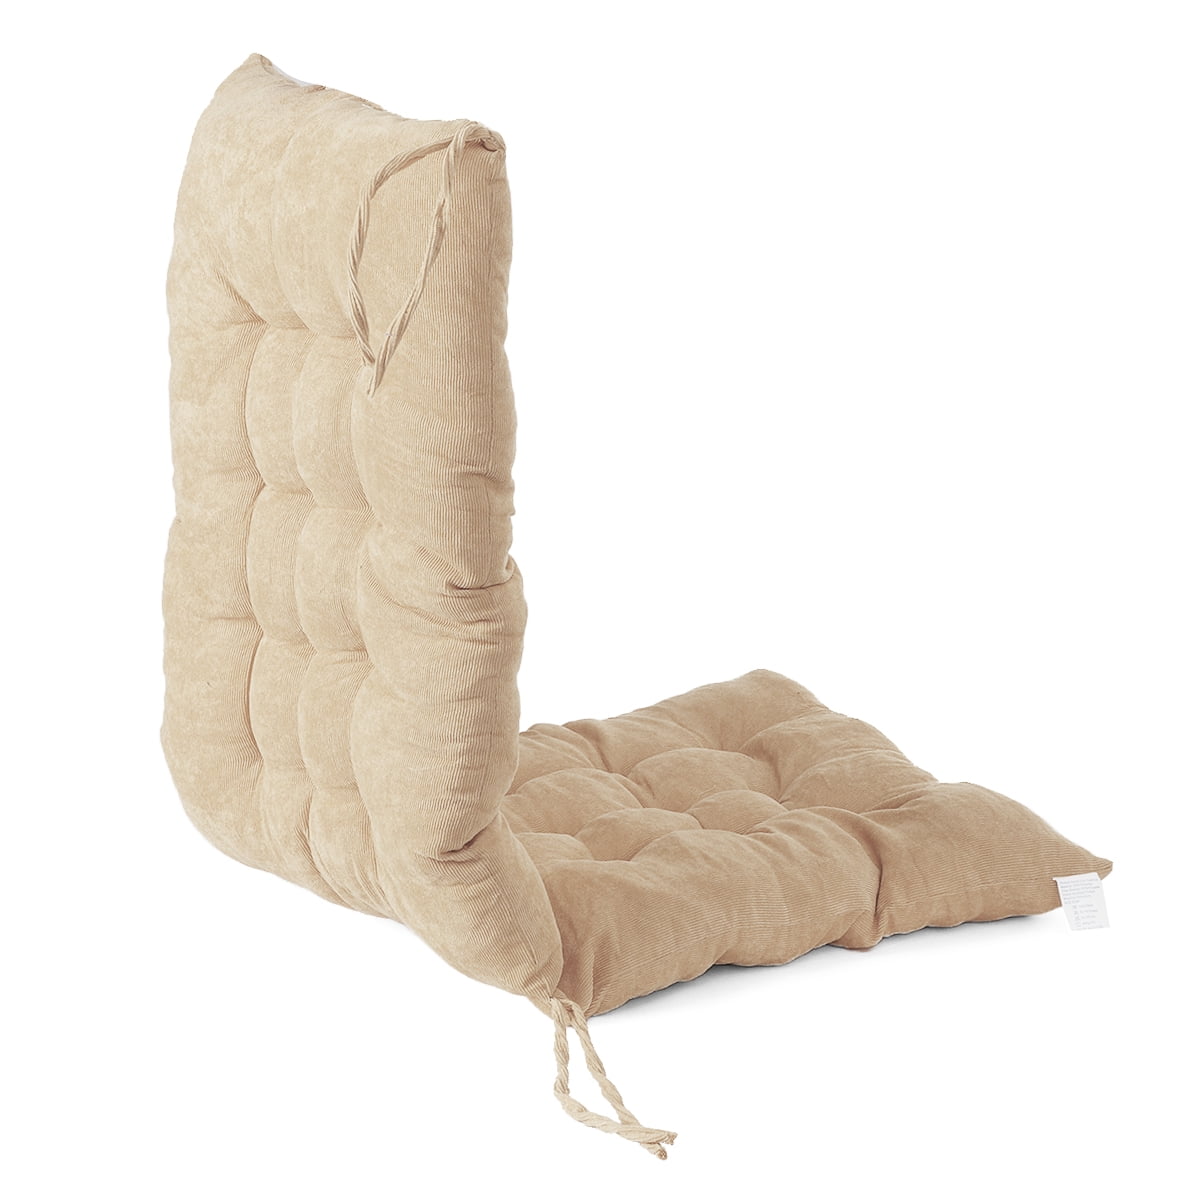 Hayden Grey Rocking Chair Cushions - Size Extra-Large - Latex Foam Filled  Seat P 313109839885